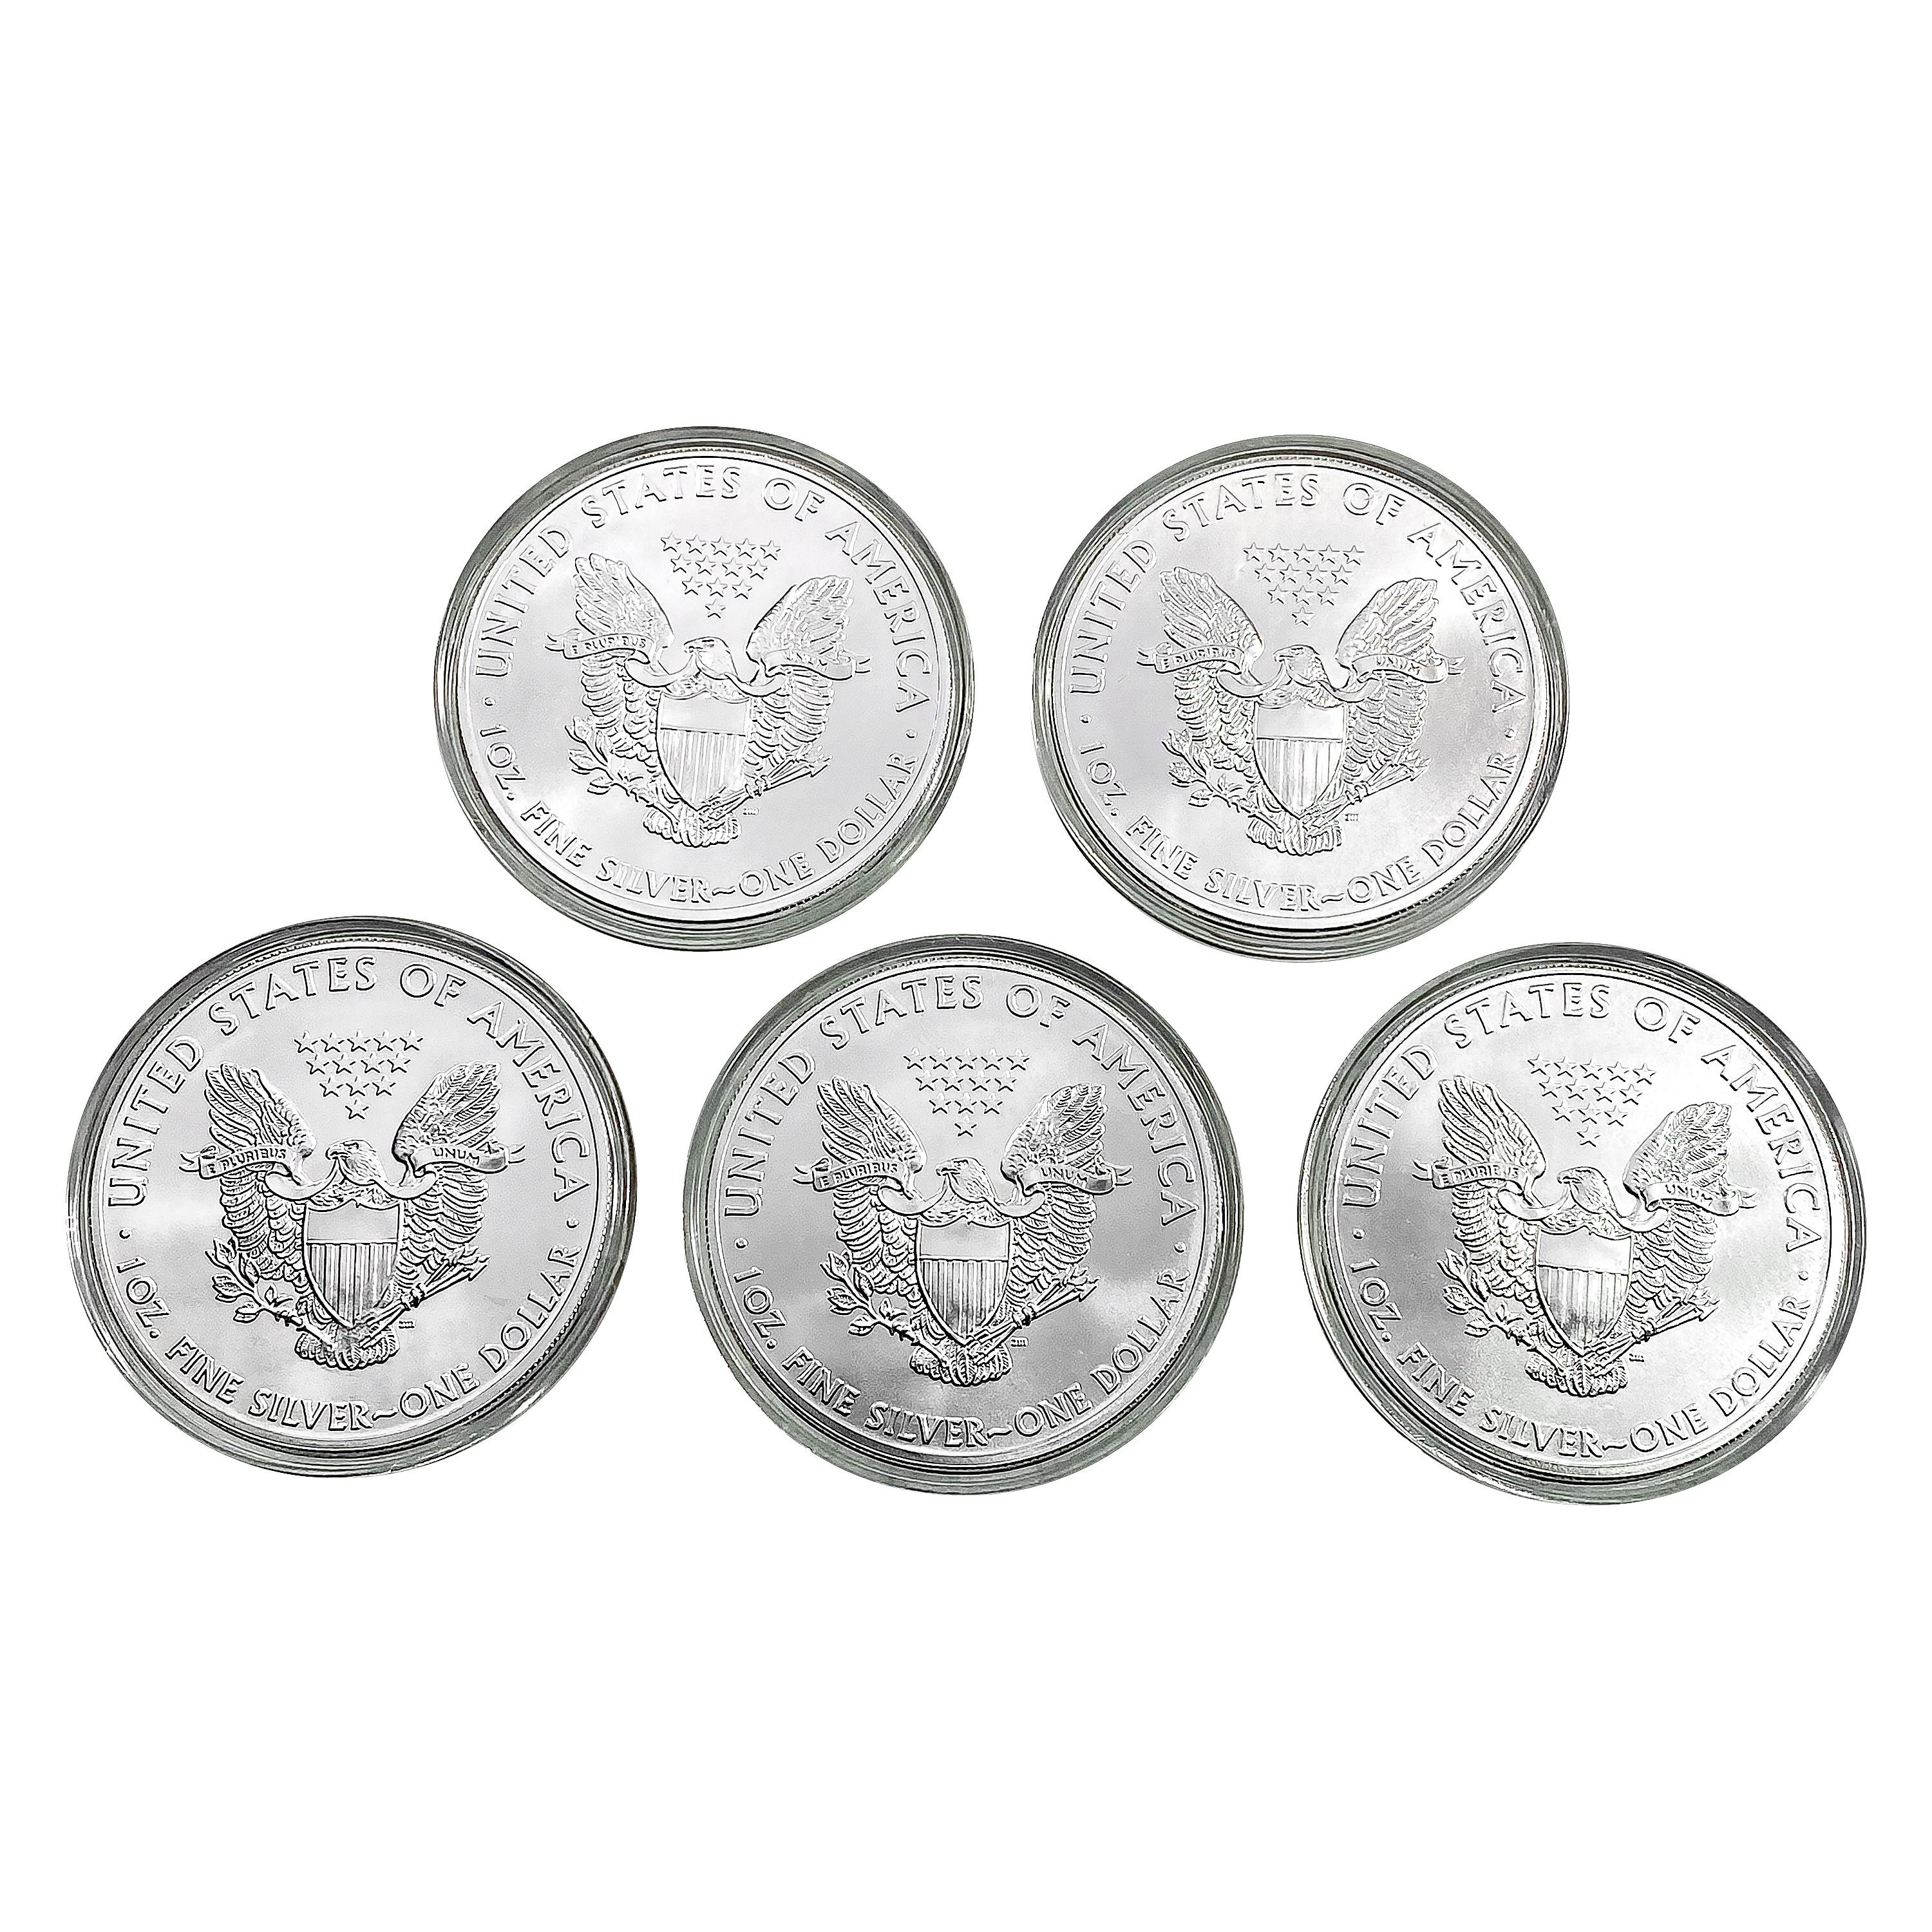 2015 US Silver Eagles [5 Coins]